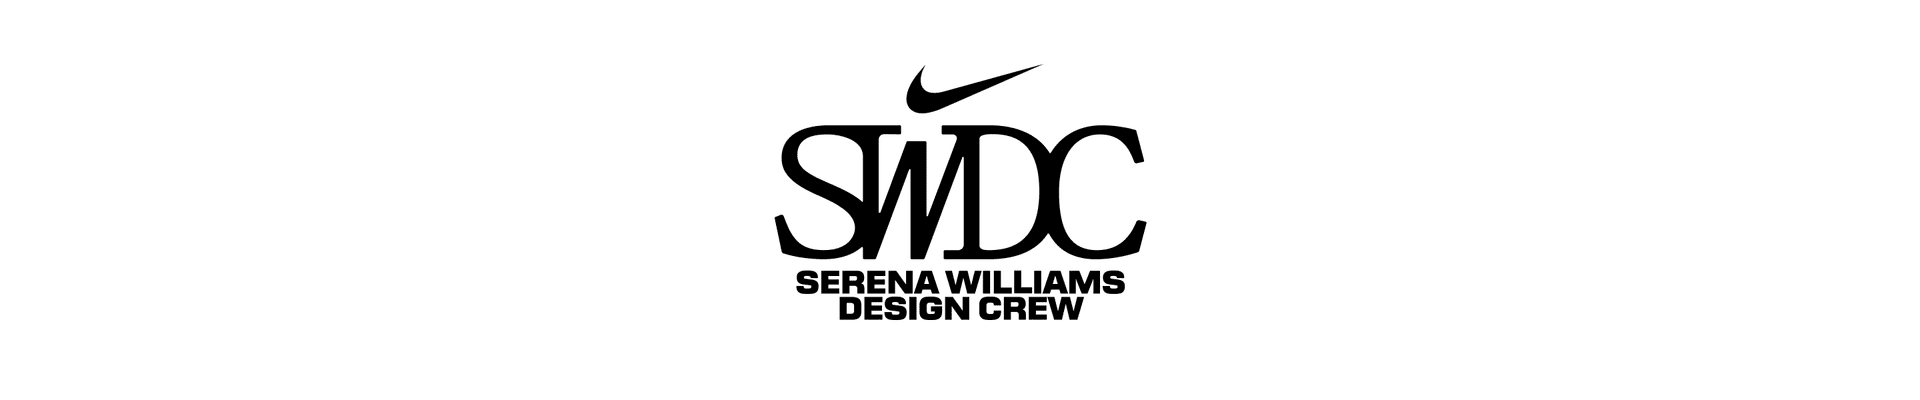 Serena Williams and Her Nike Design Crew Debut Their First Collection